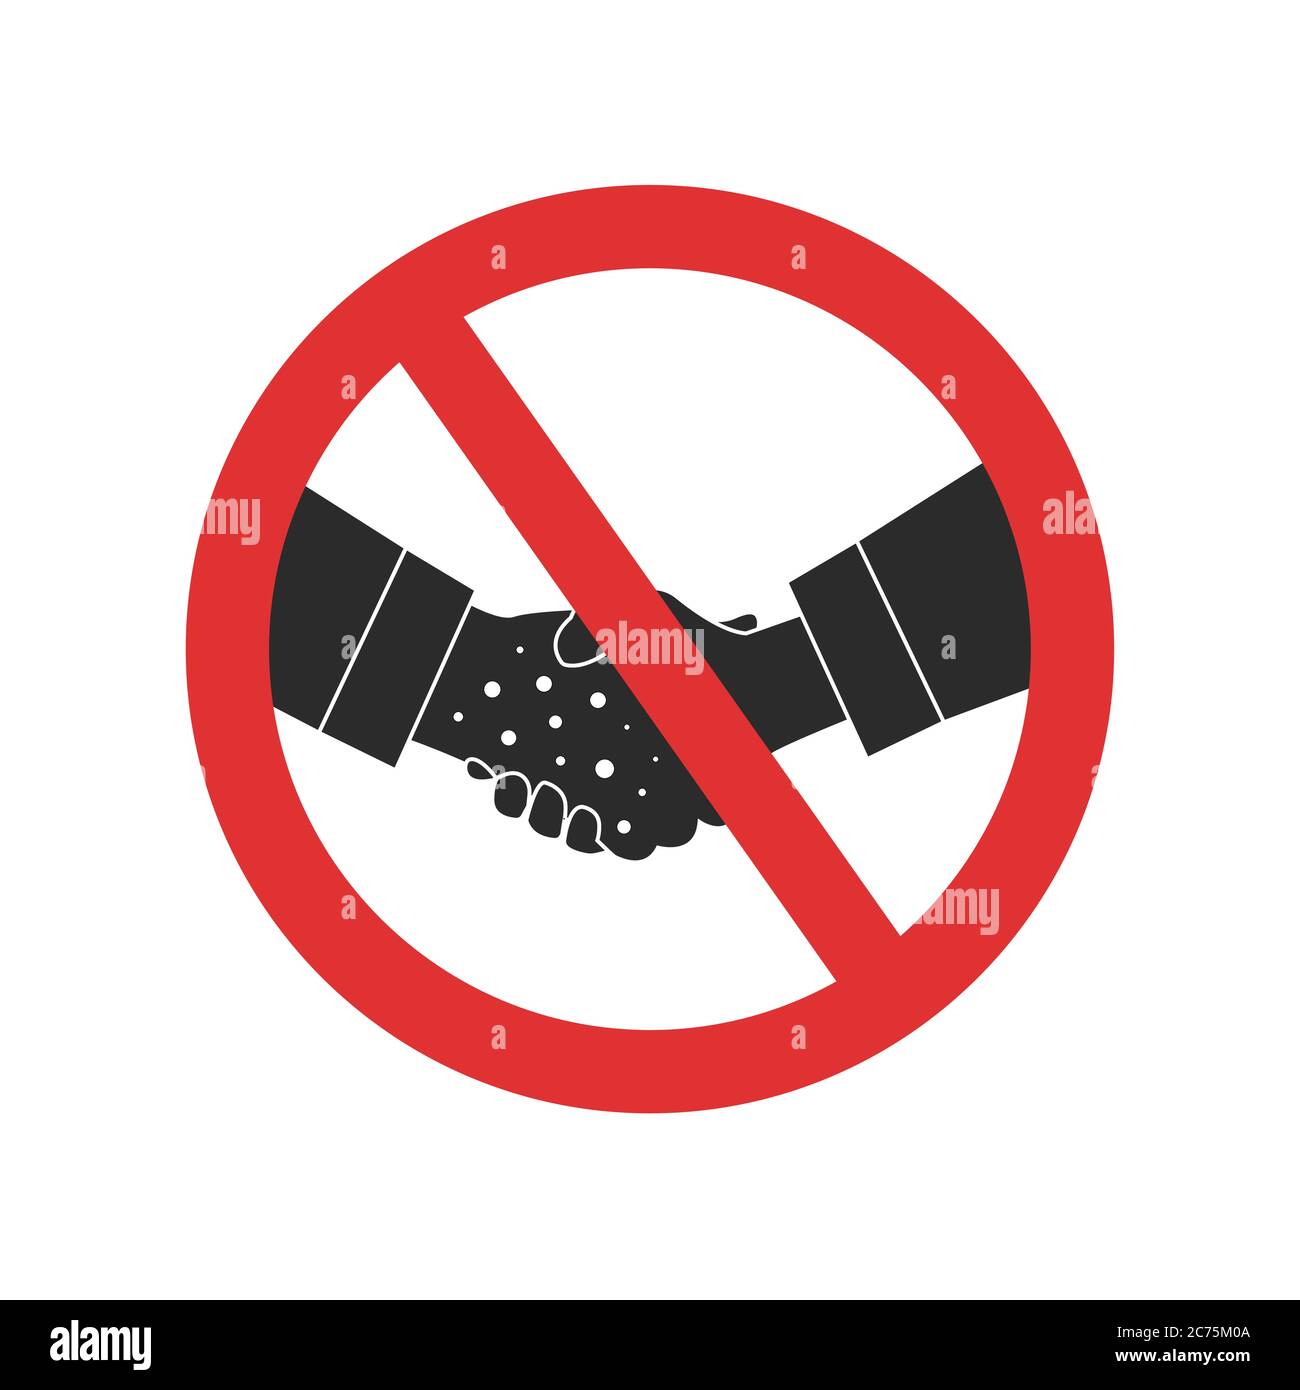 Handshake forbidden vector isolated sign. Shaking hands with infected people is prohibited icon Stock Vector